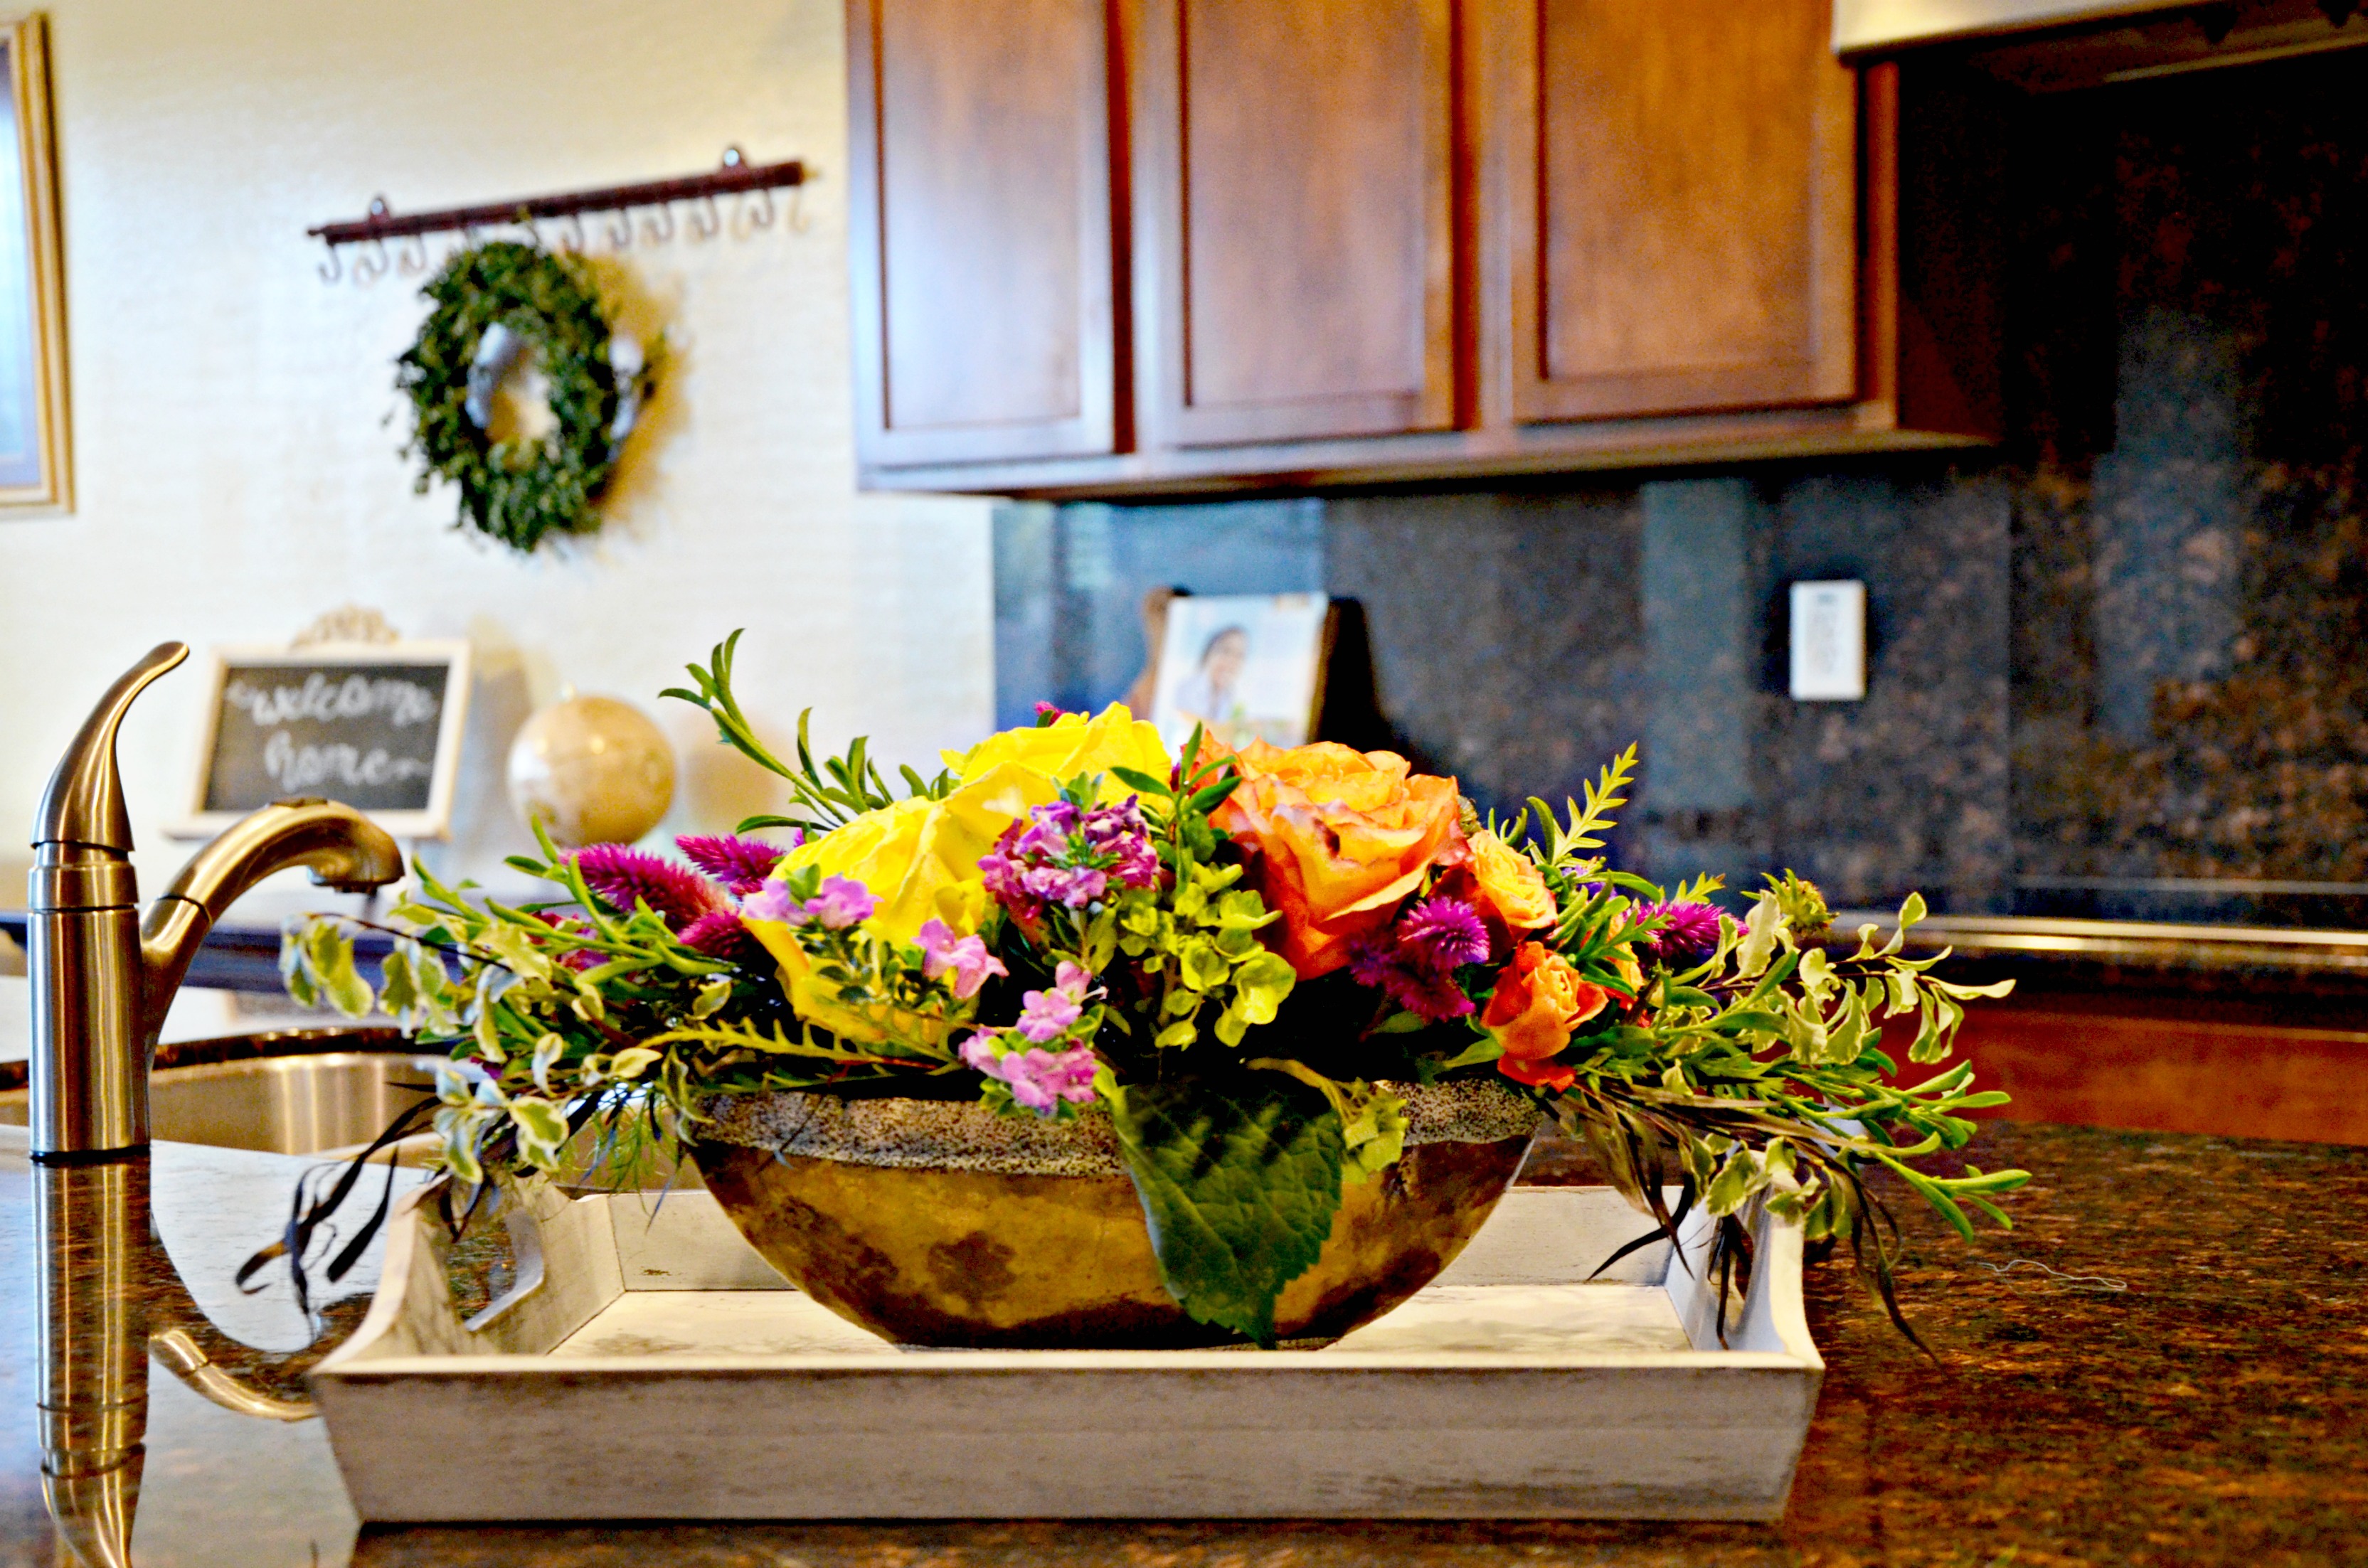 Stage with fresh flowers is included in these Gilbert, Arizona Moving Resources because they keep your home smelling and looking fresh and welcoming to potential buyers.